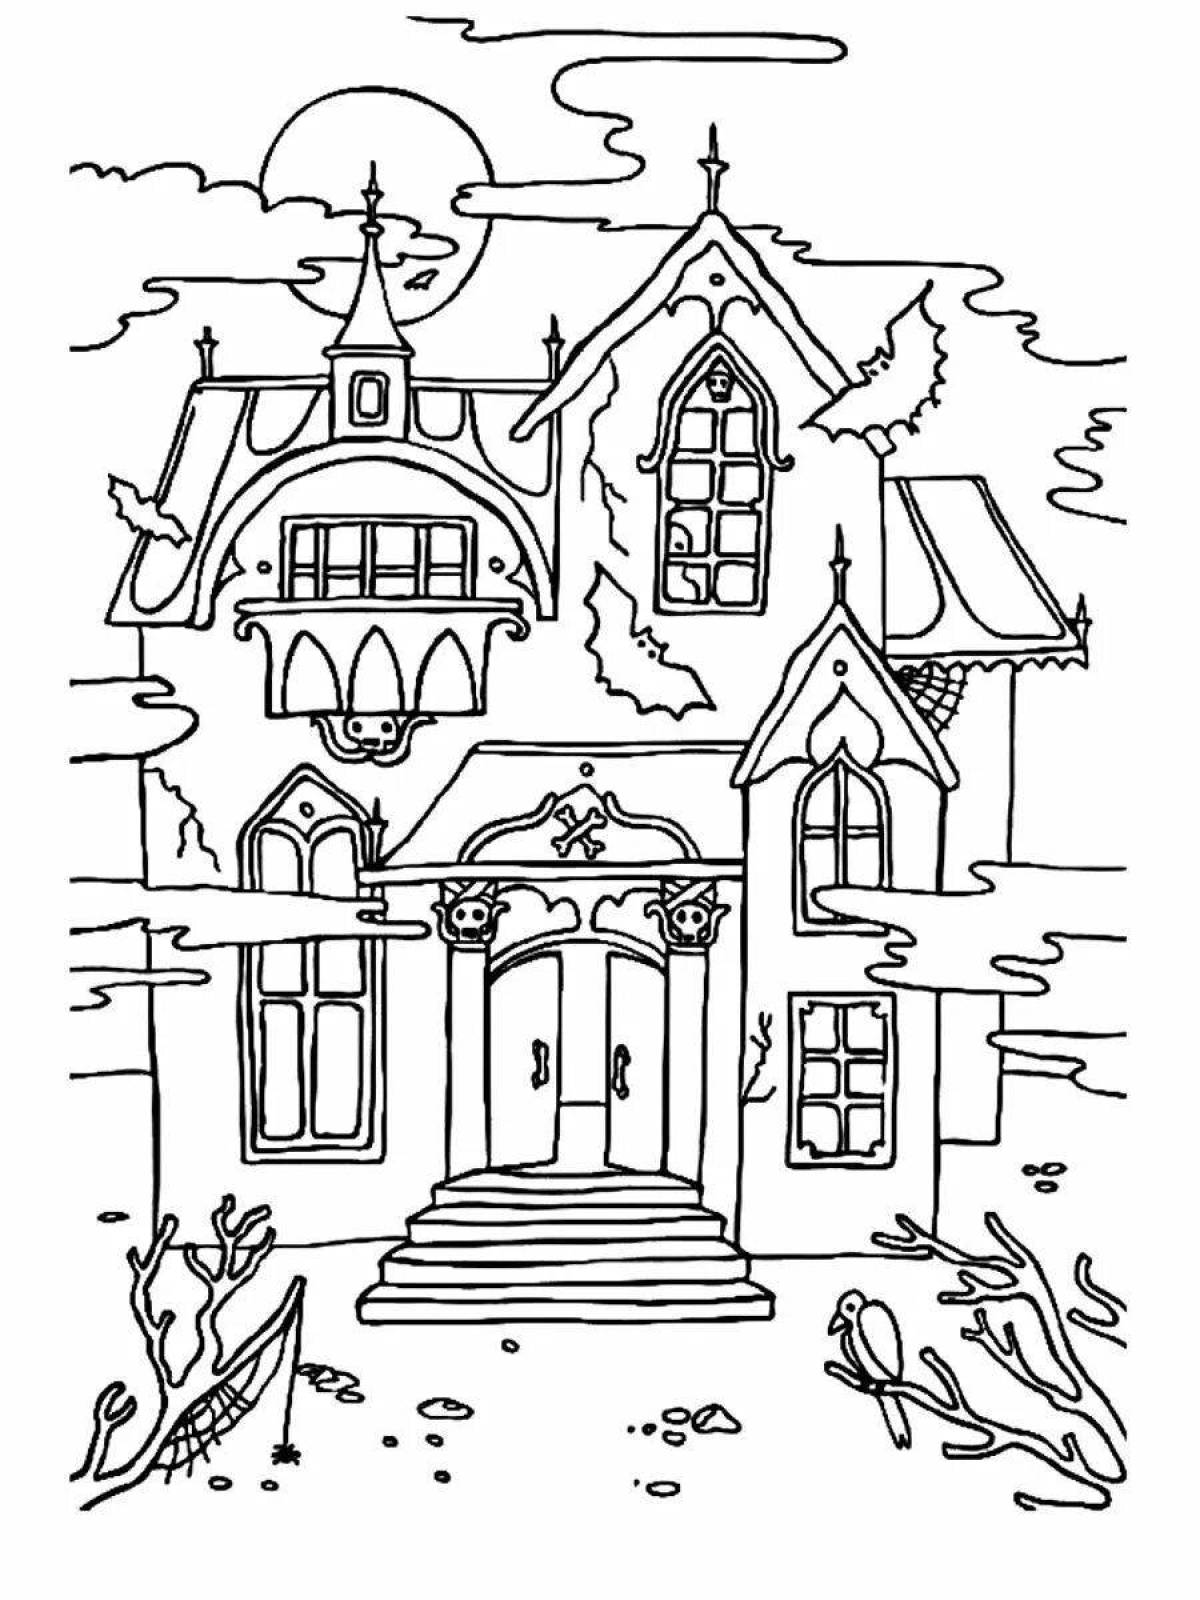 Coloring page sad abandoned house